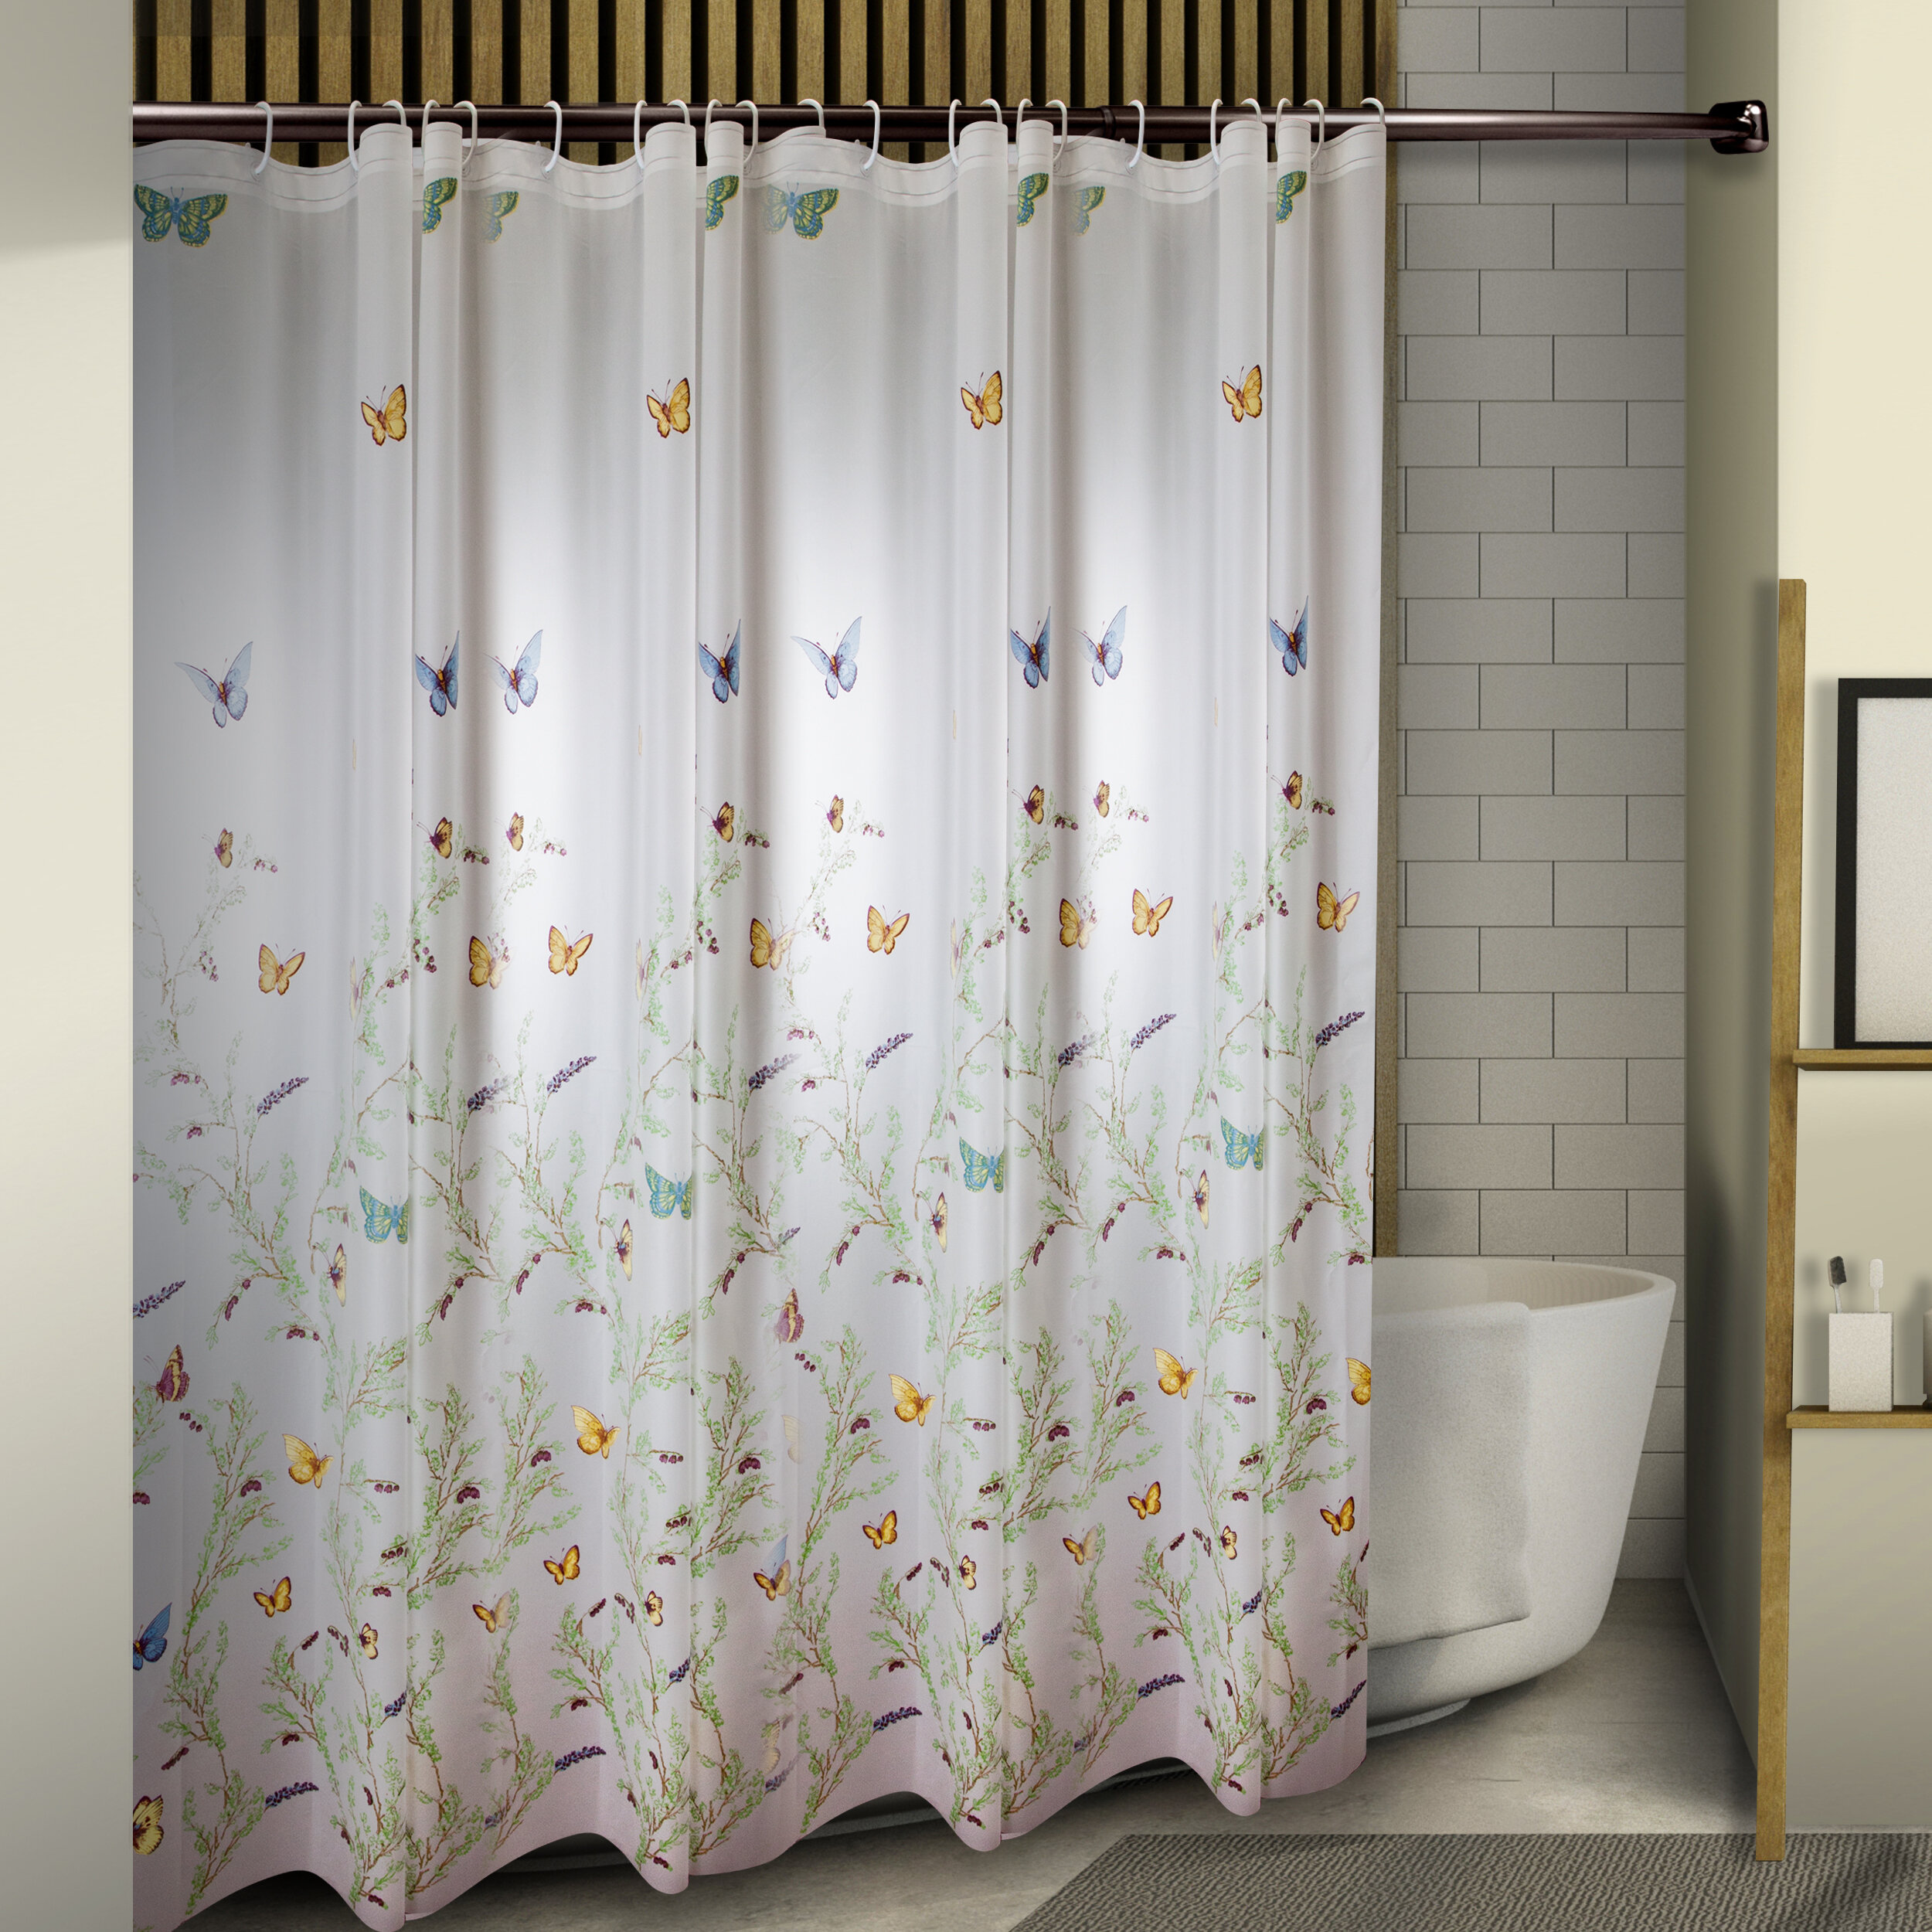 Earby Vinyl Floral Shower Curtain with Hooks Included